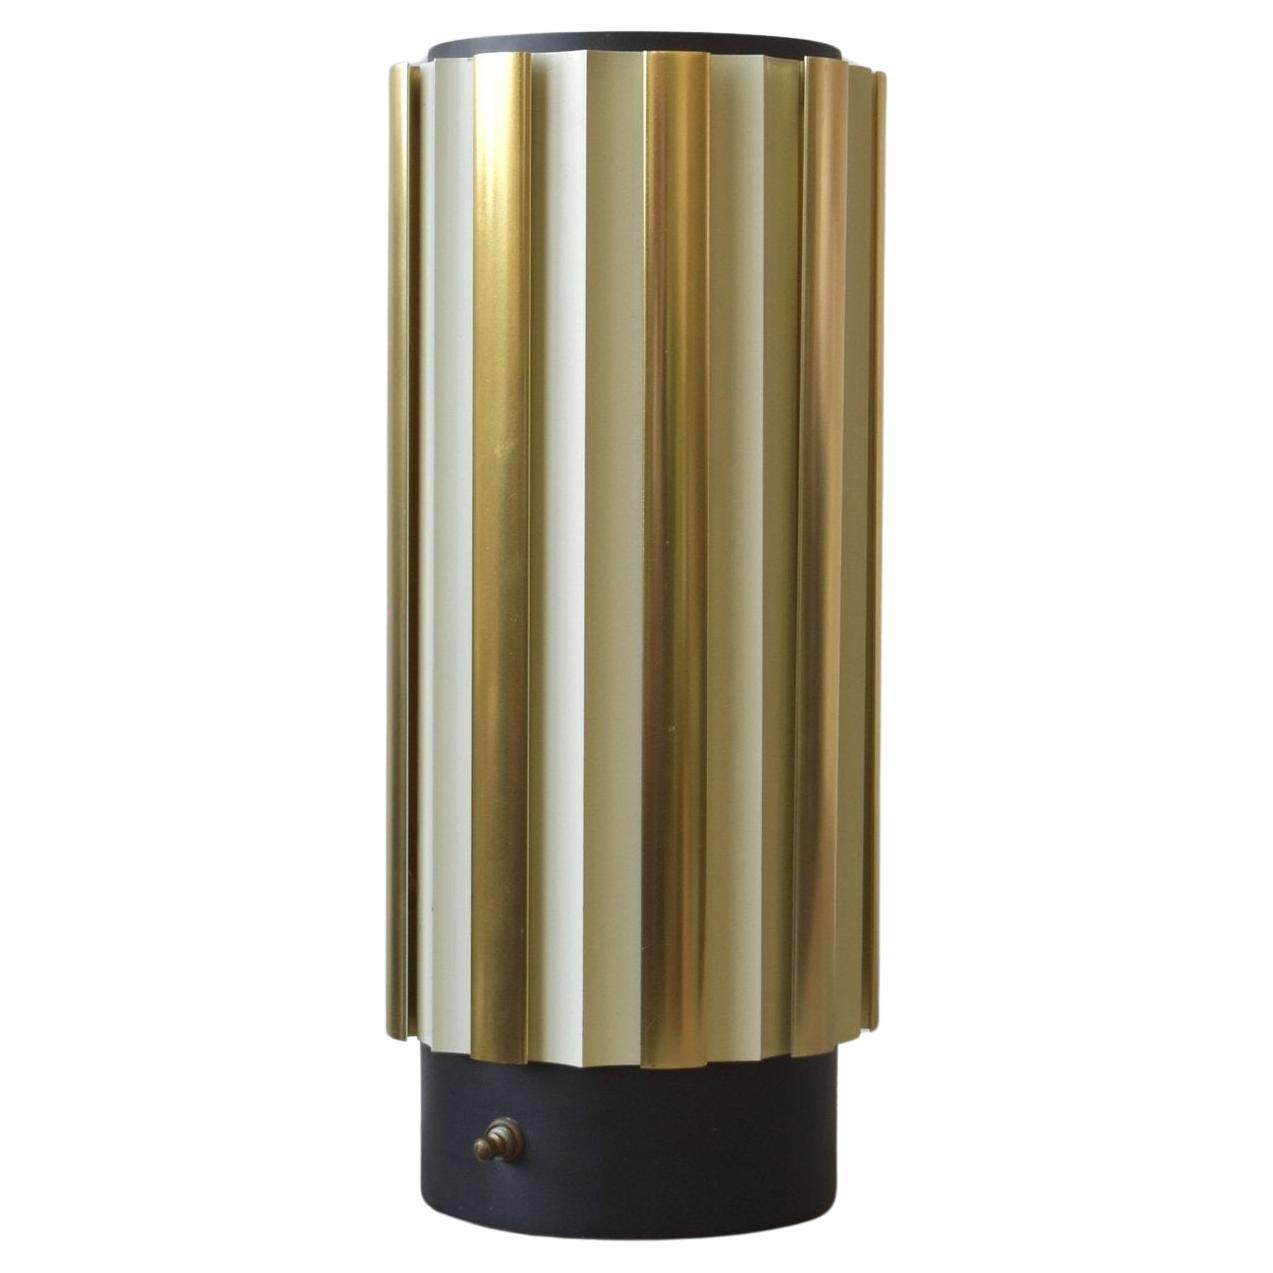 Vintage Louvered Metal Lamp Attributed to Gerald Thurston for Lightolier, 1960s